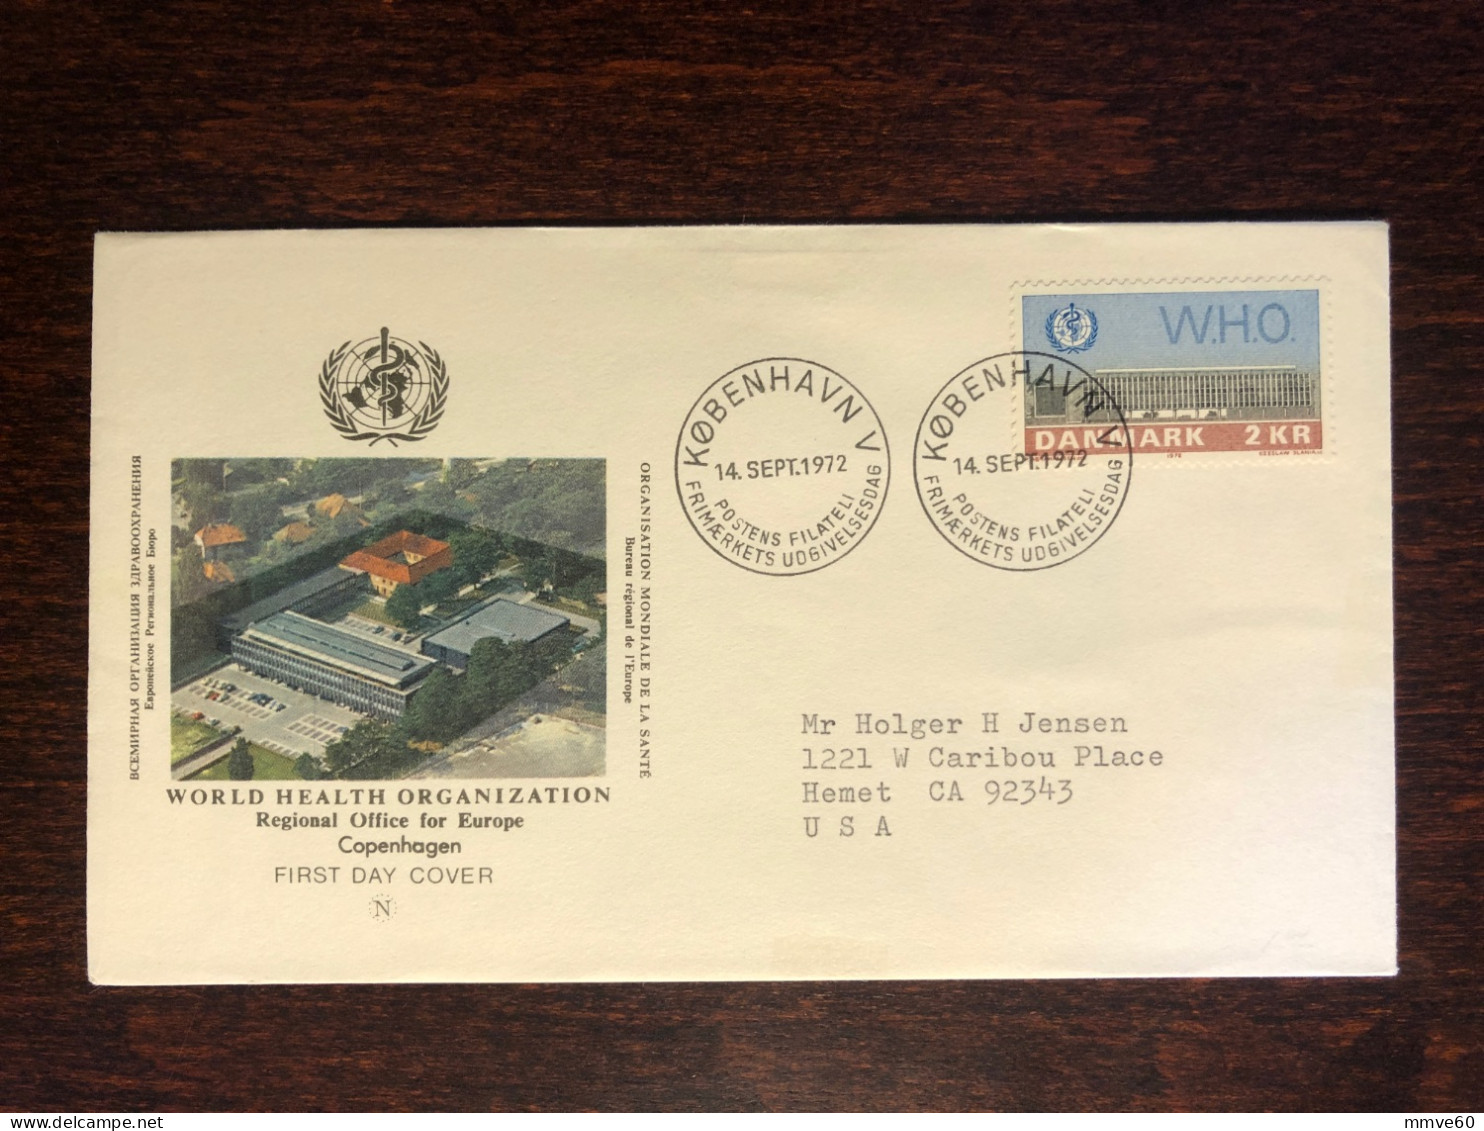 DENMARK FDC COVER 1972 YEAR WHO HEALTH MEDICINE STAMPS - FDC